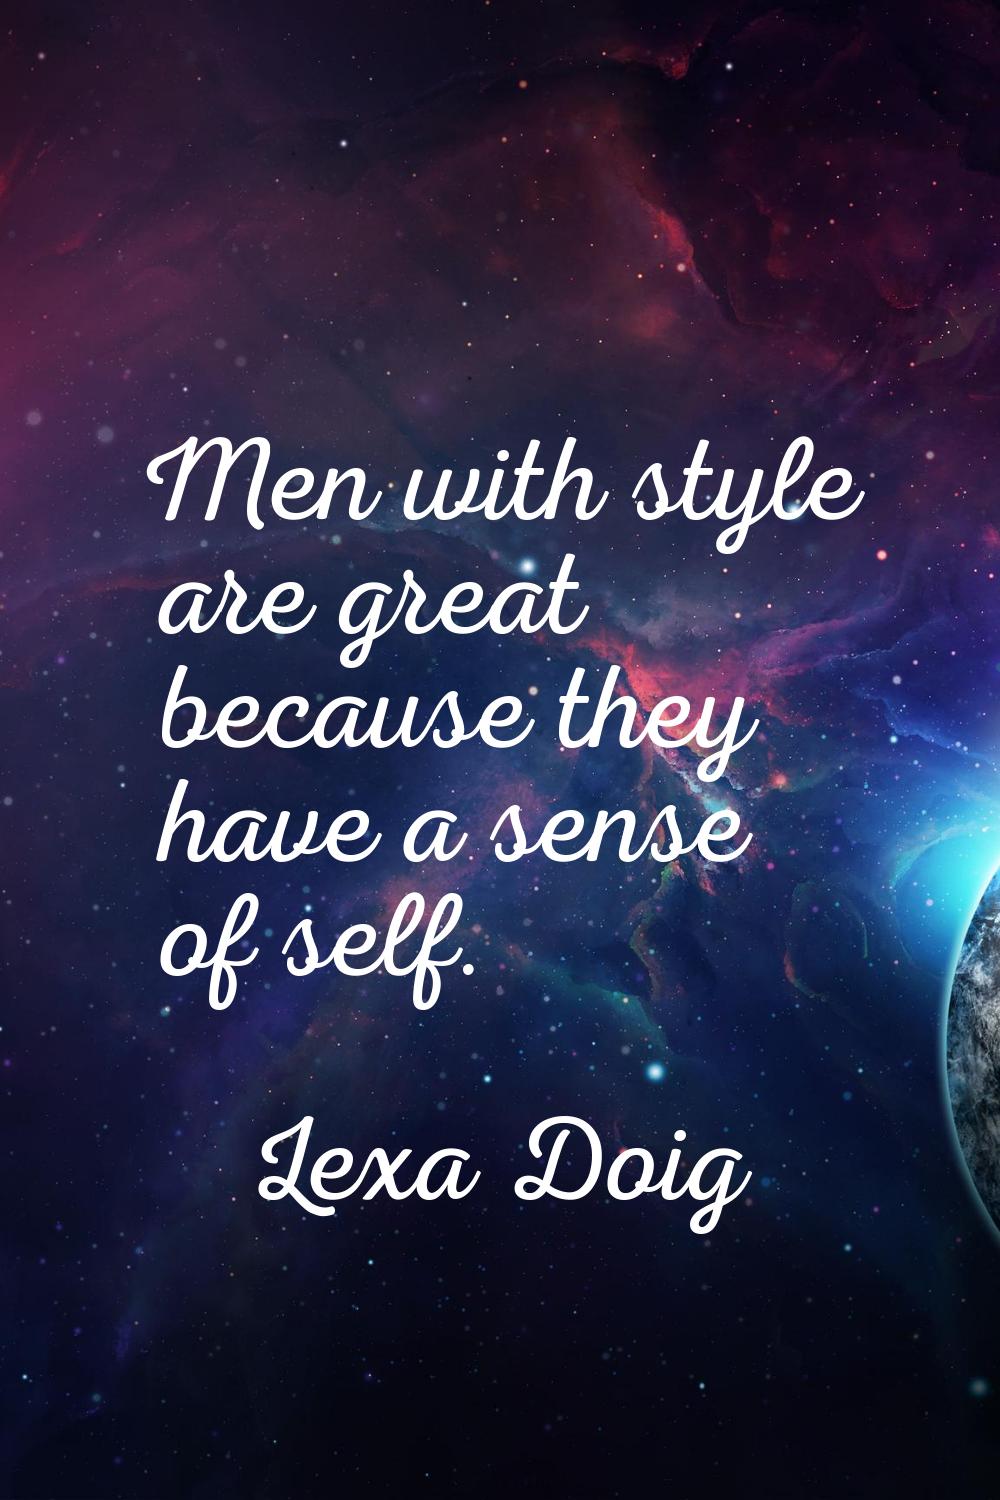 Men with style are great because they have a sense of self.